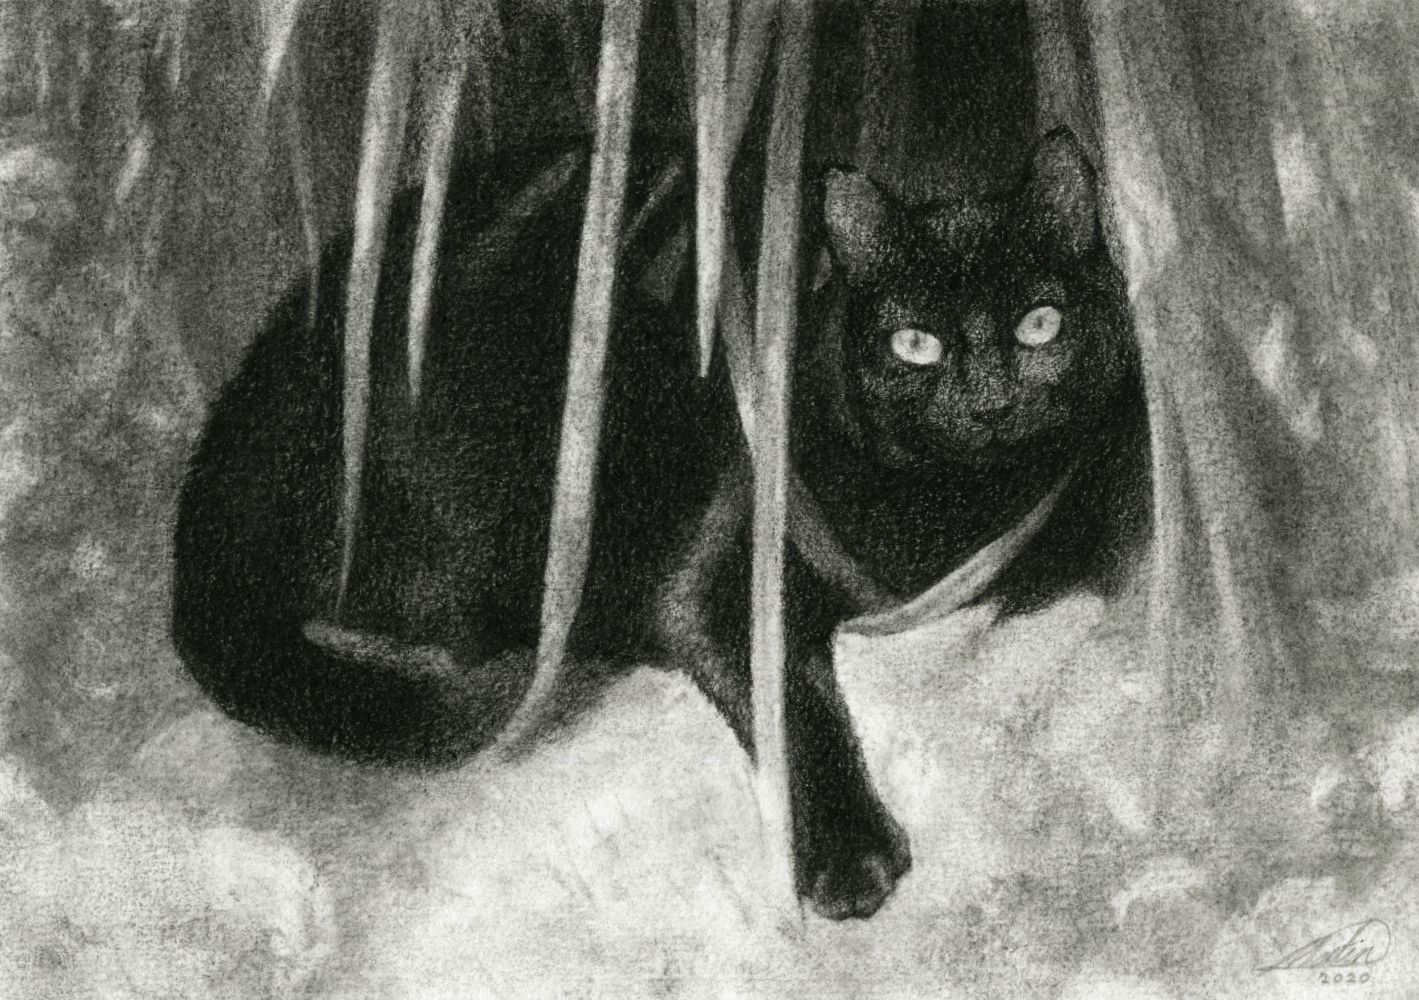 Cat Drawing in Charcoal on Paper, by Artist & Illustrator James Martin